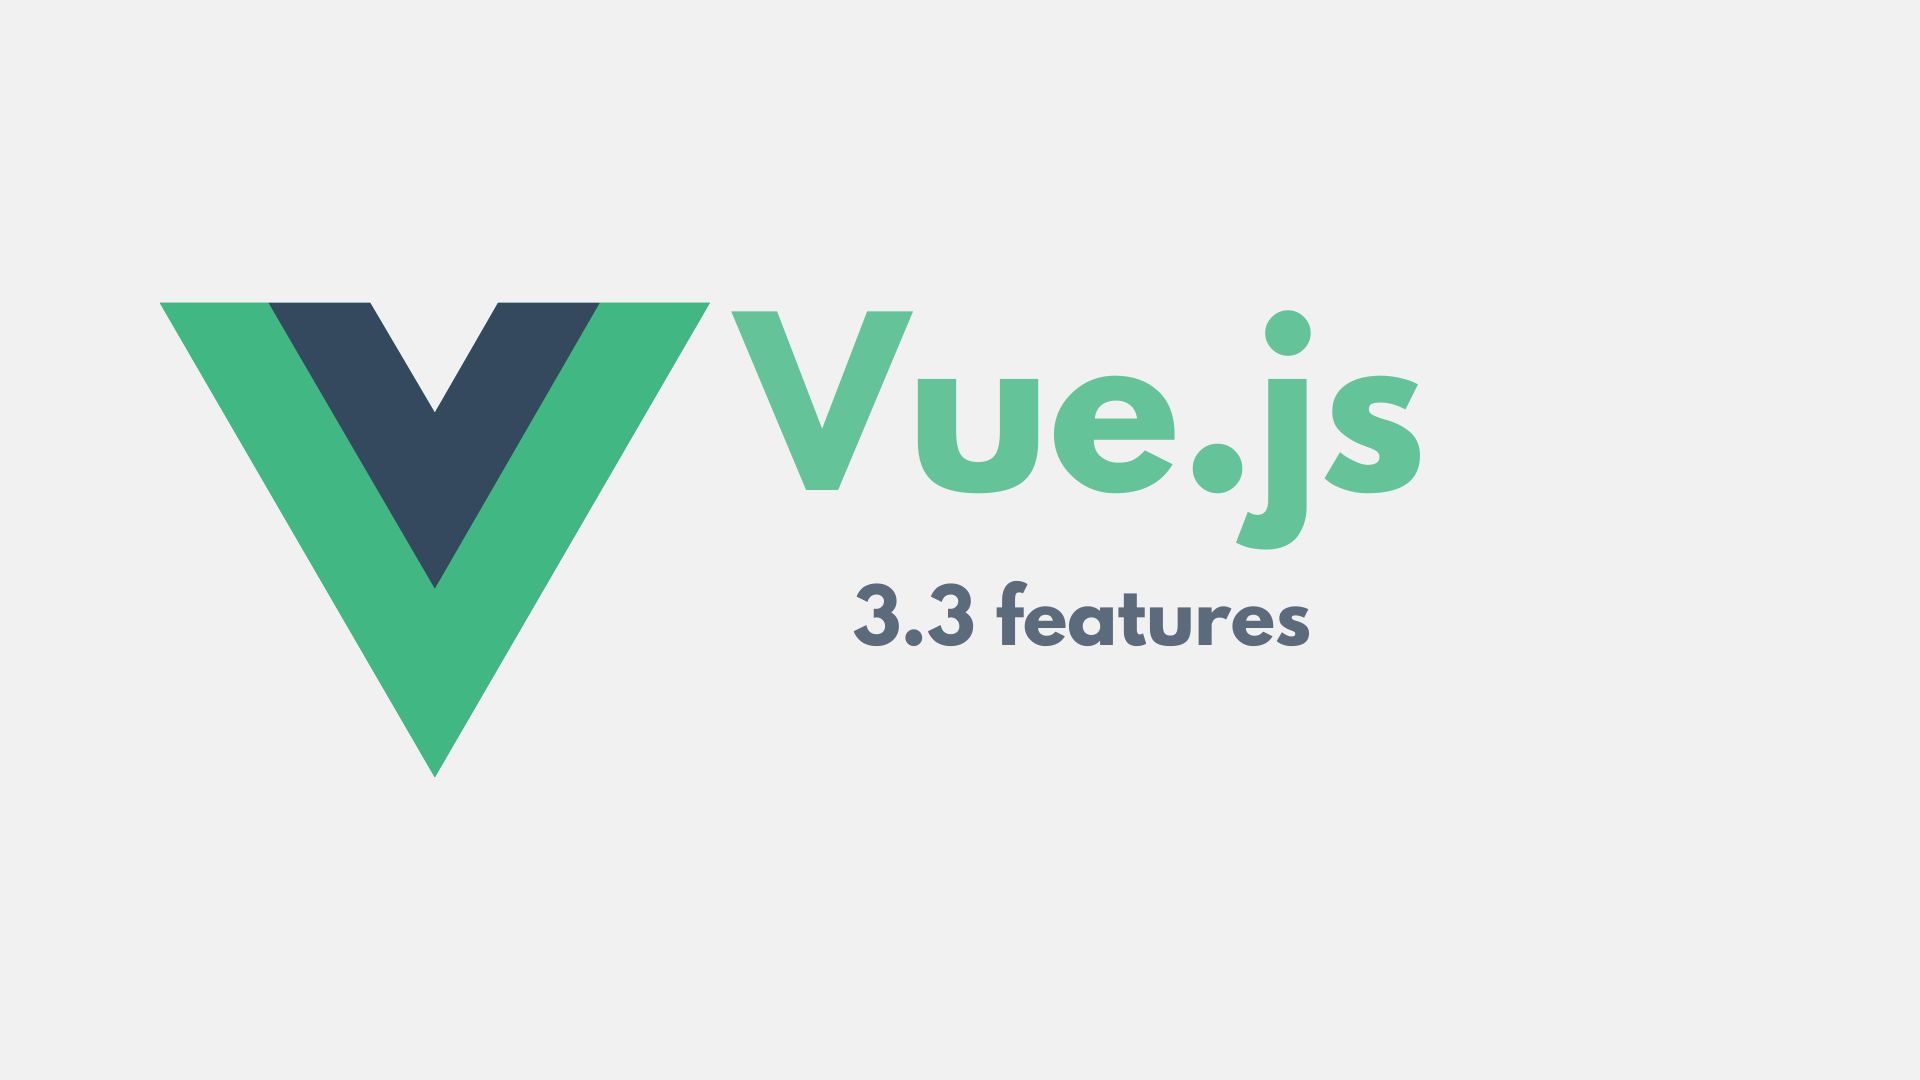 Vue.js 3.3 release and features